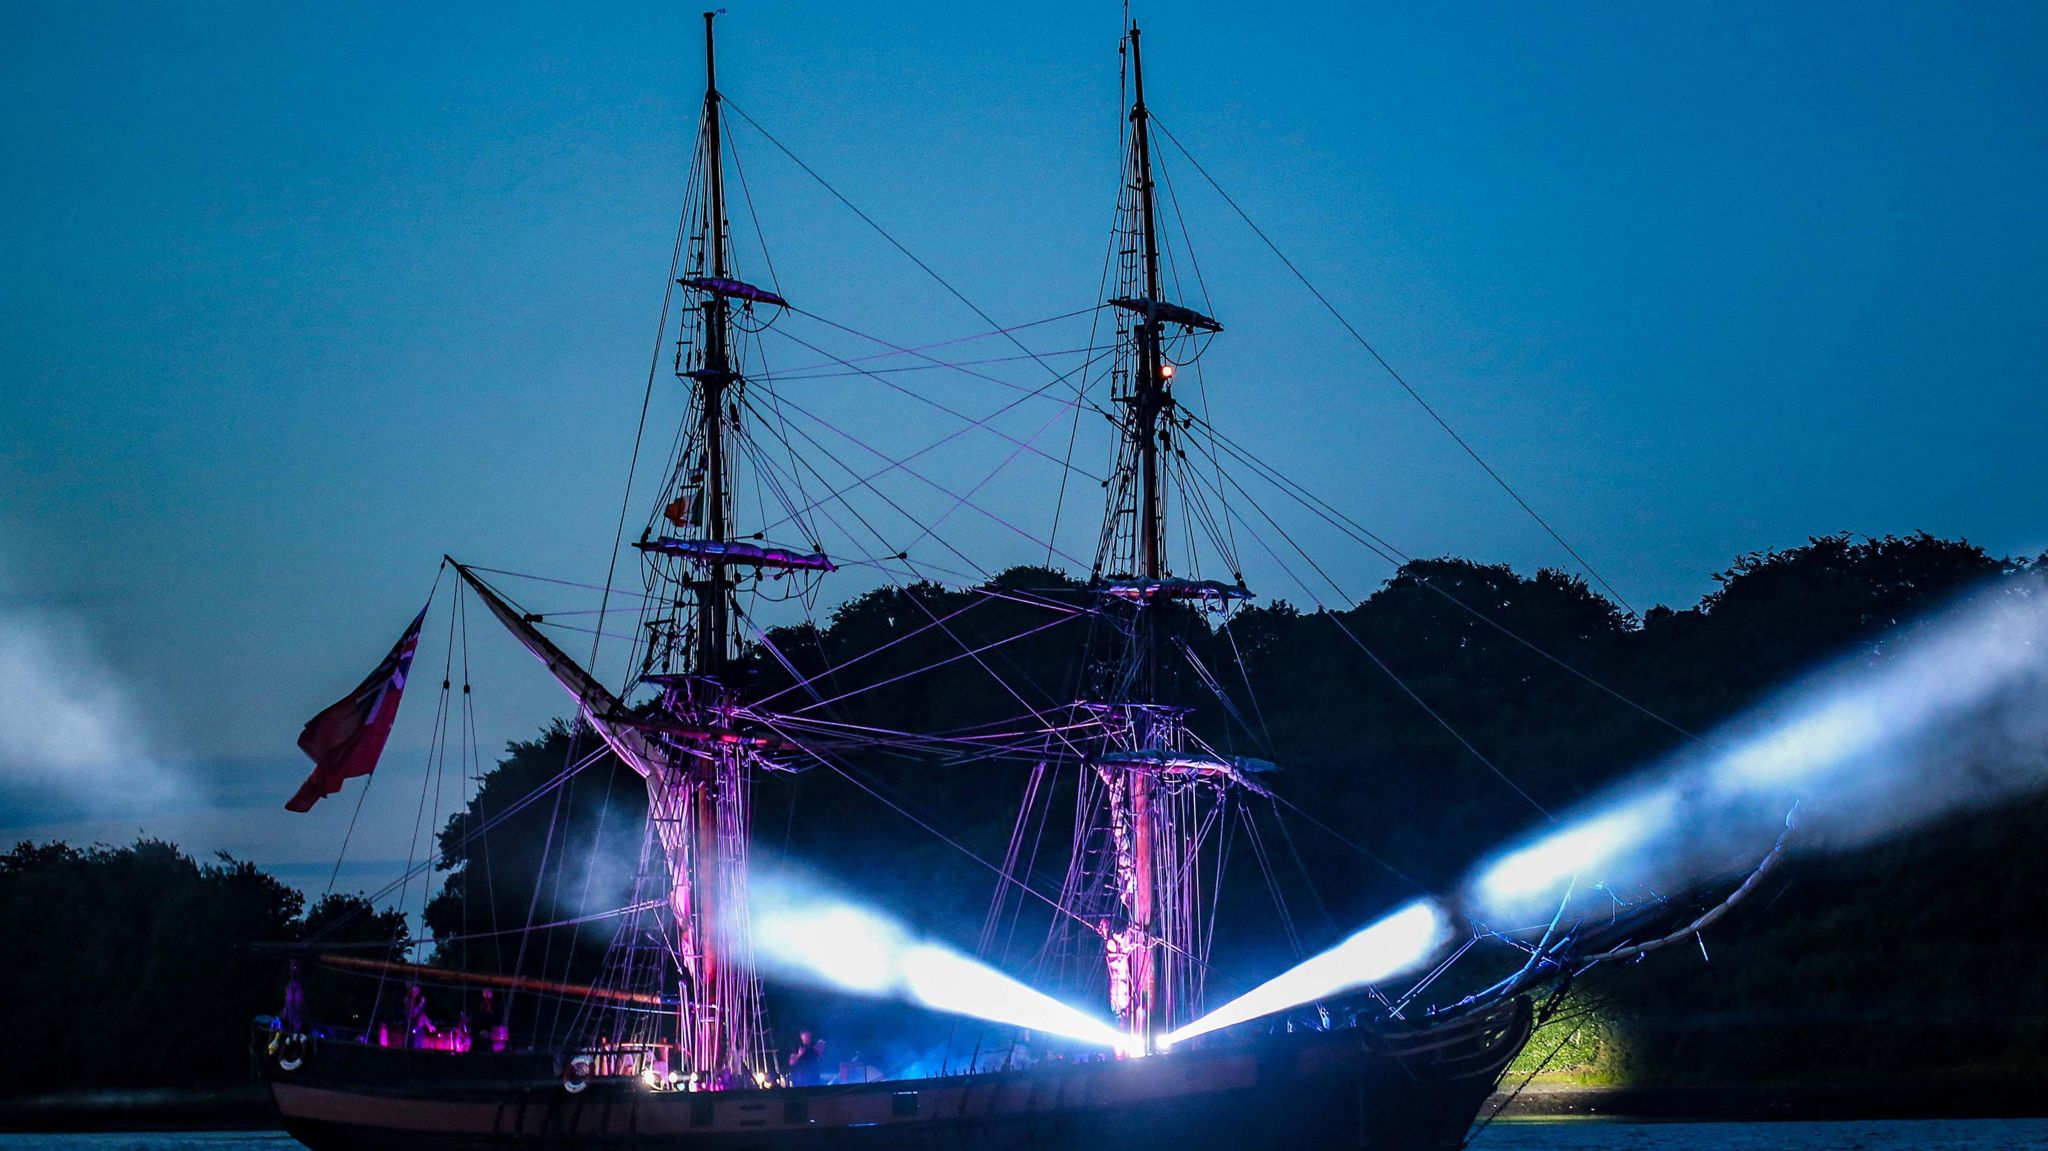 An illuminated tall ship sails at night up the river foyle to mark end of the maritime festival